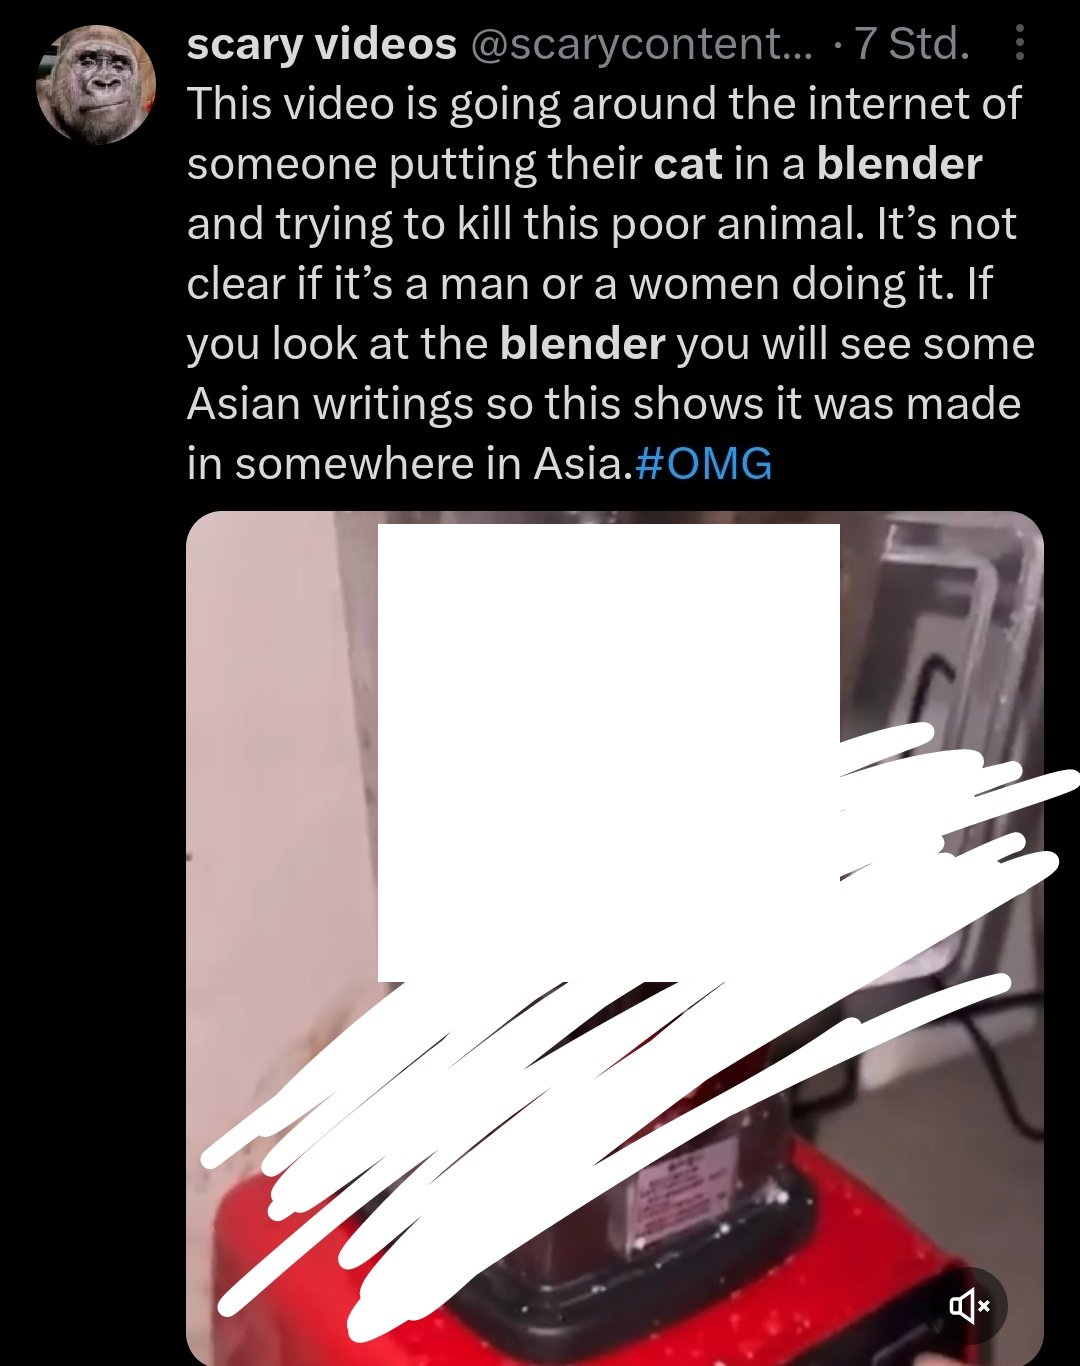 there is a cat blender video going around Cat Blender Video Know